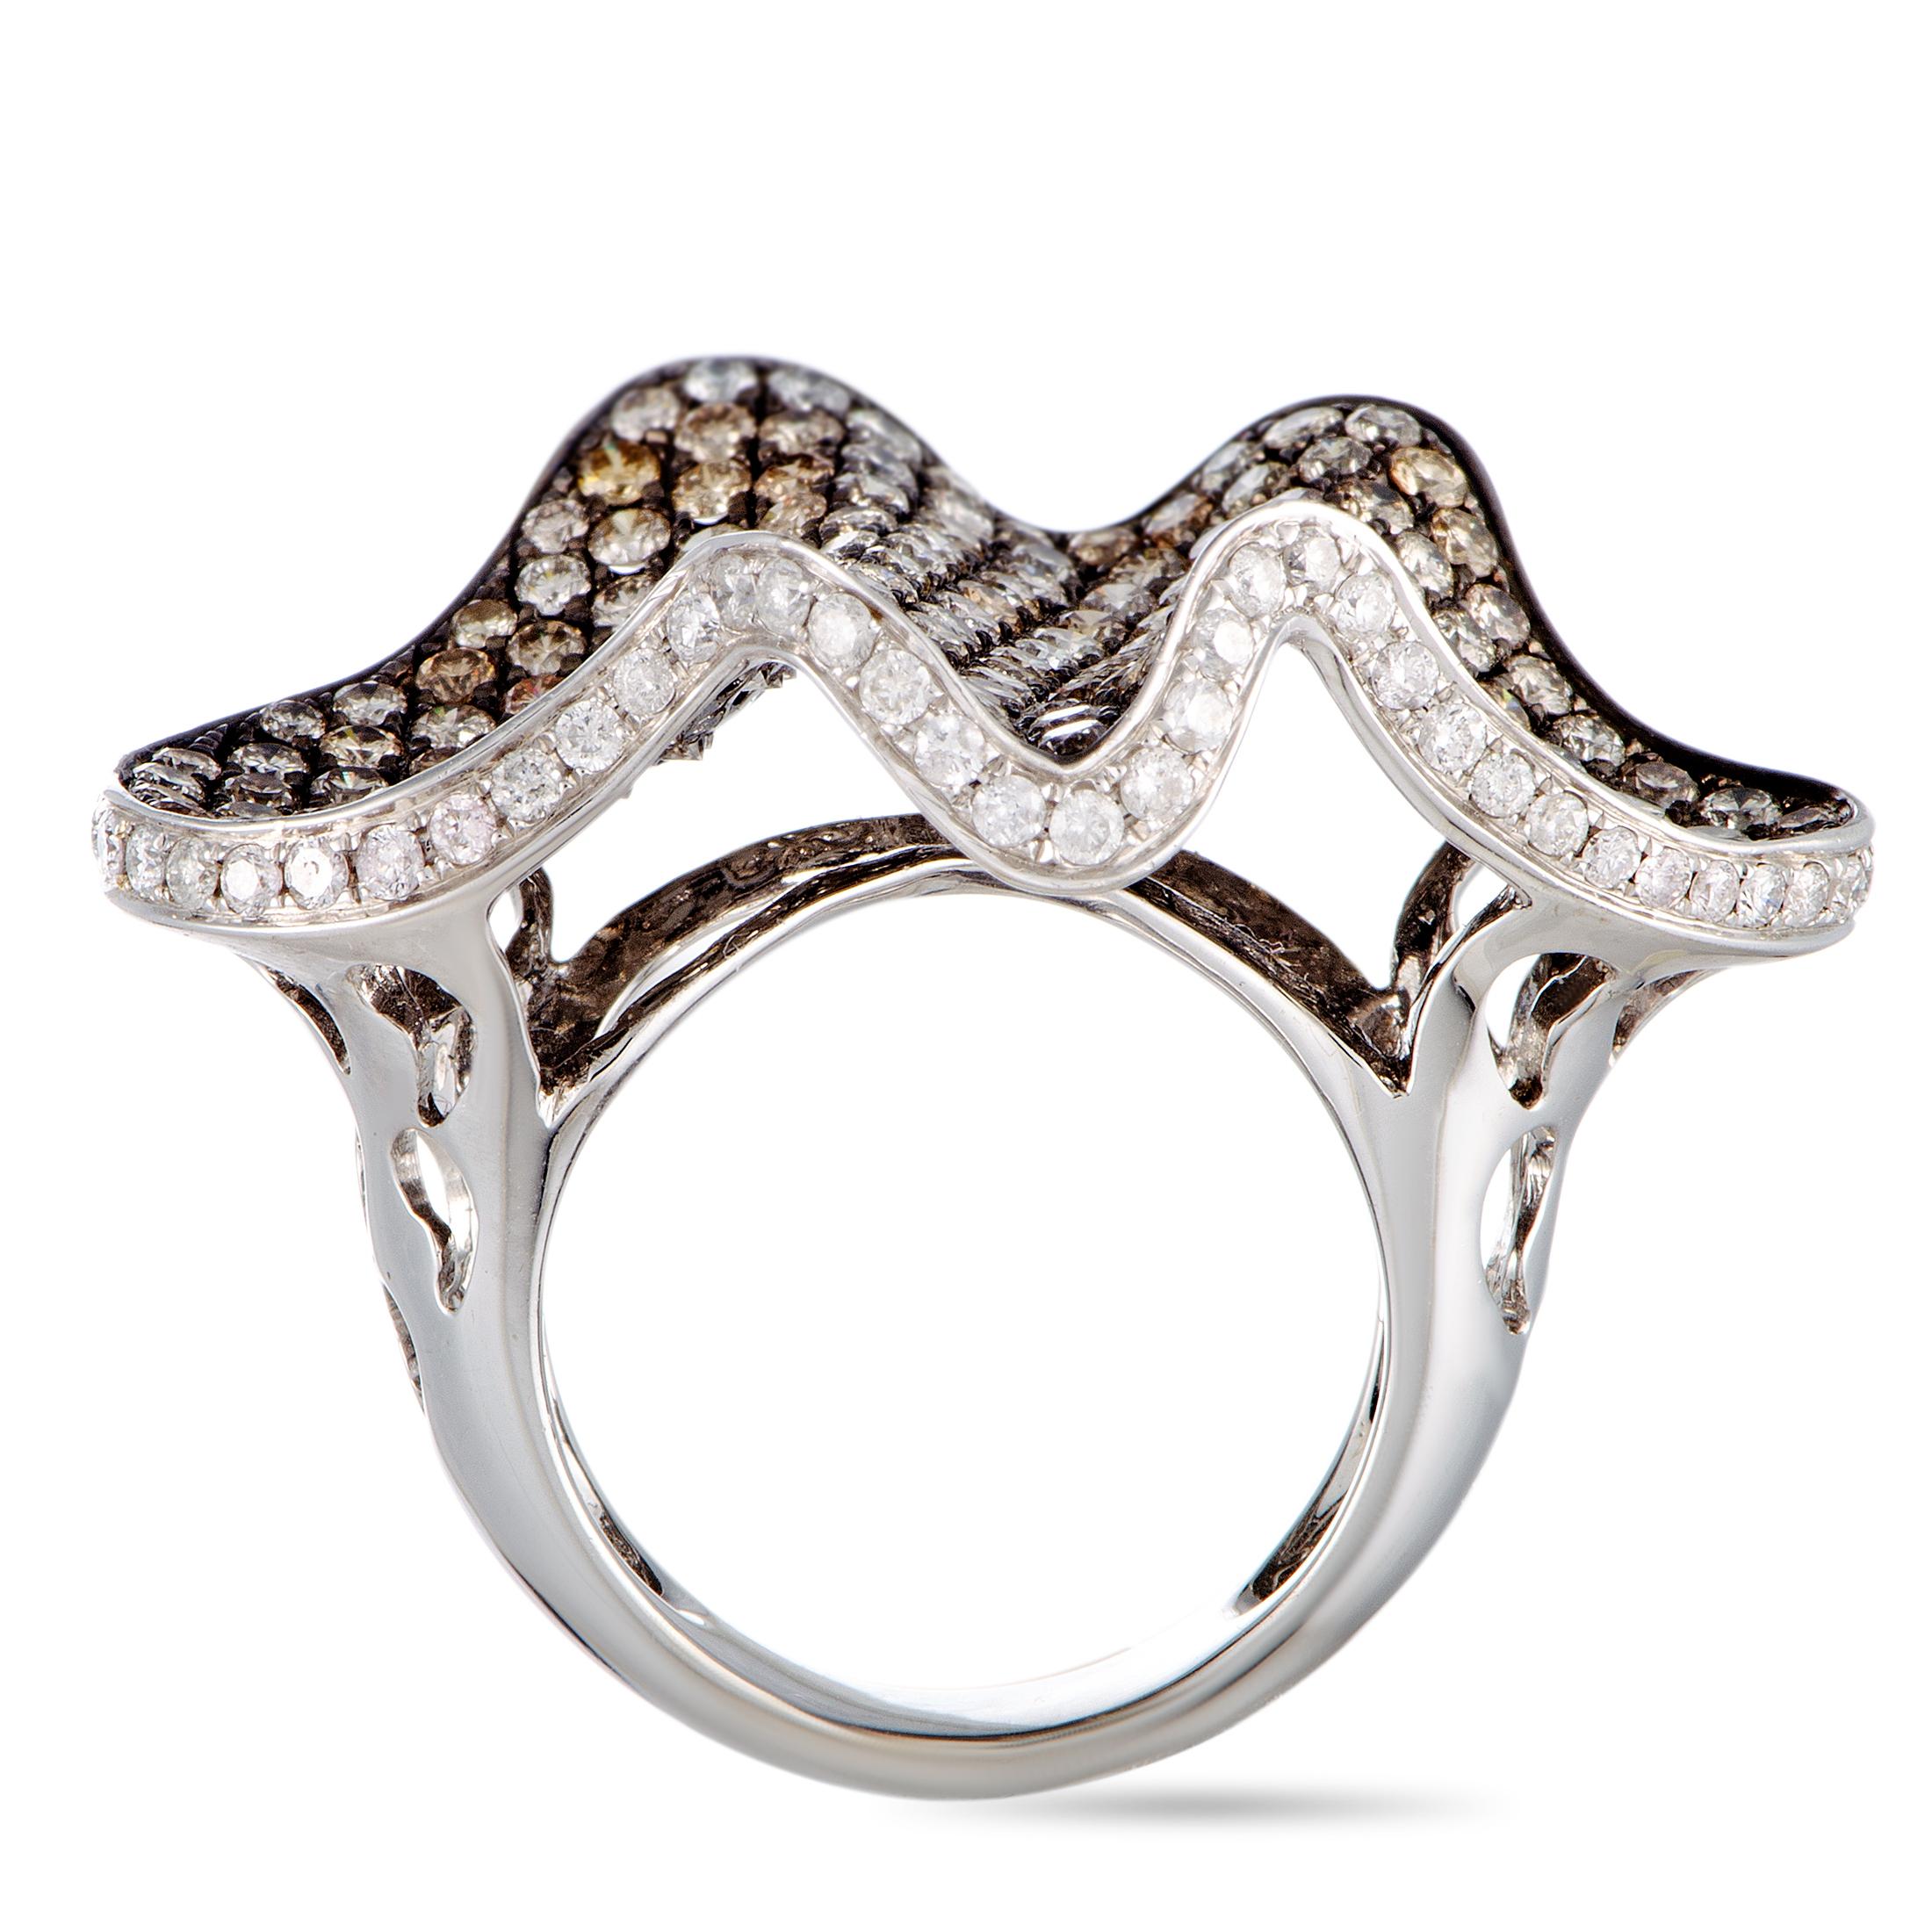 This ring is made out of 18K white gold and diamonds that amount to 6.50 carats. The ring weighs 16.8 grams and boasts band thickness of 5 mm and top height of 10 mm, while top dimensions measure 25 by 37 mm.

Offered in estate condition, this item